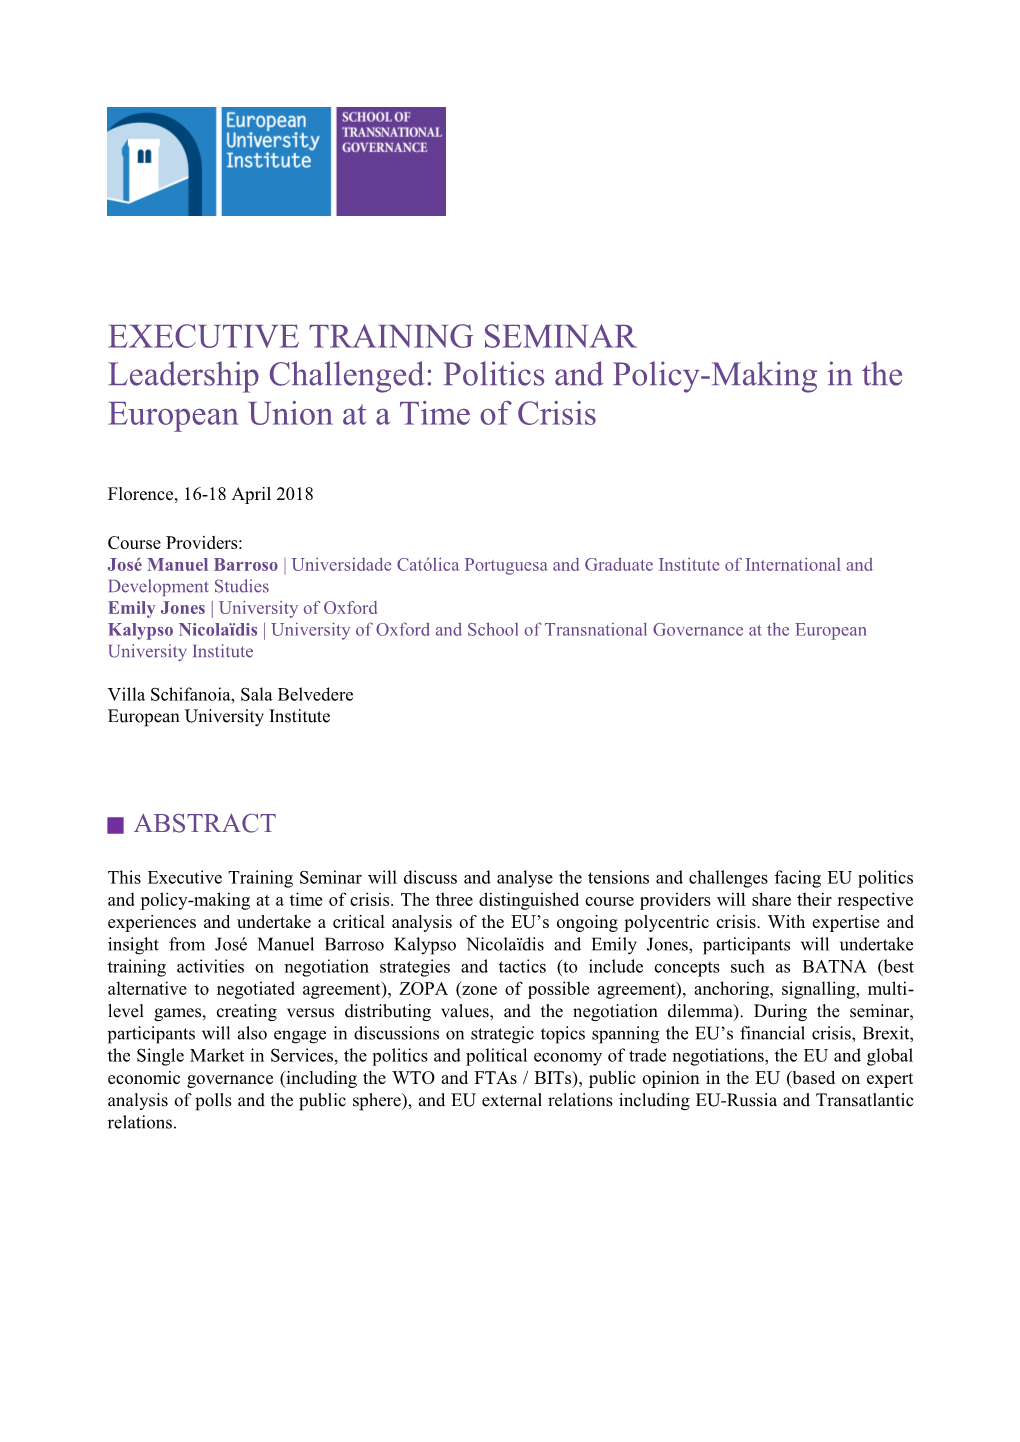 EXECUTIVE TRAINING SEMINAR Leadership Challenged: Politics and Policy-Making in the European Union at a Time of Crisis